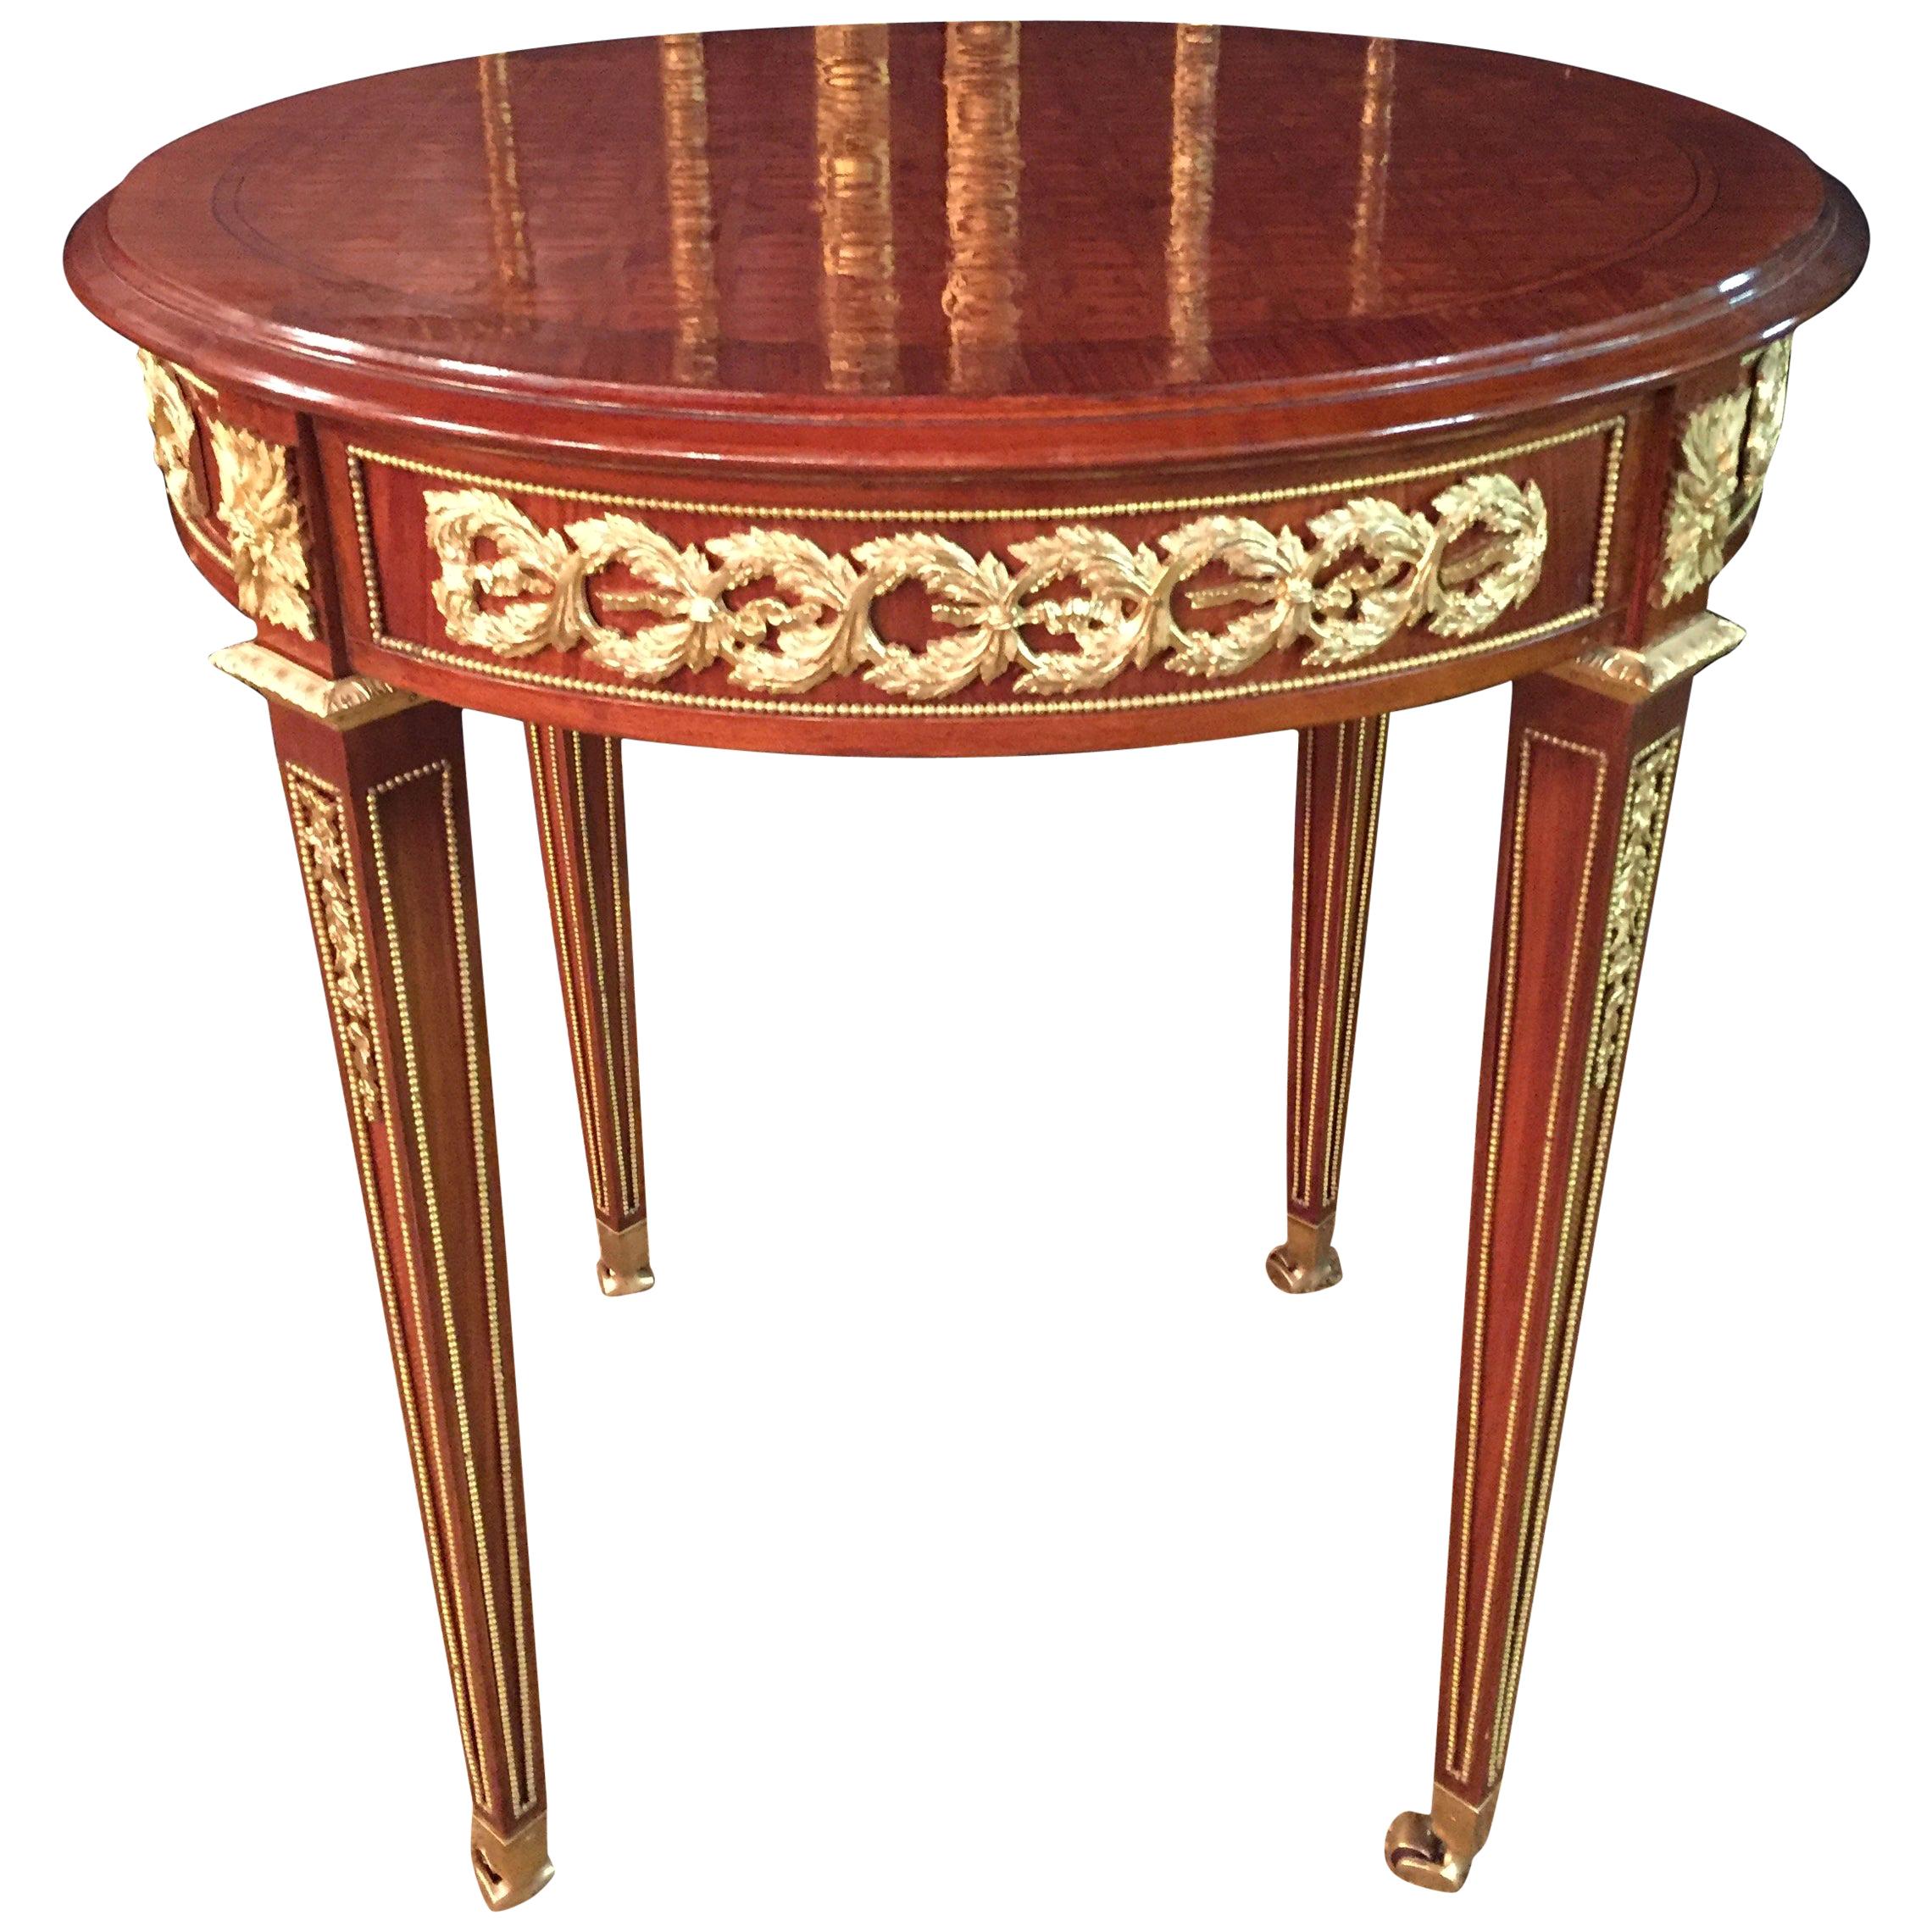 20th Century Louis XVI Style with Round Platte with Inlays French Table